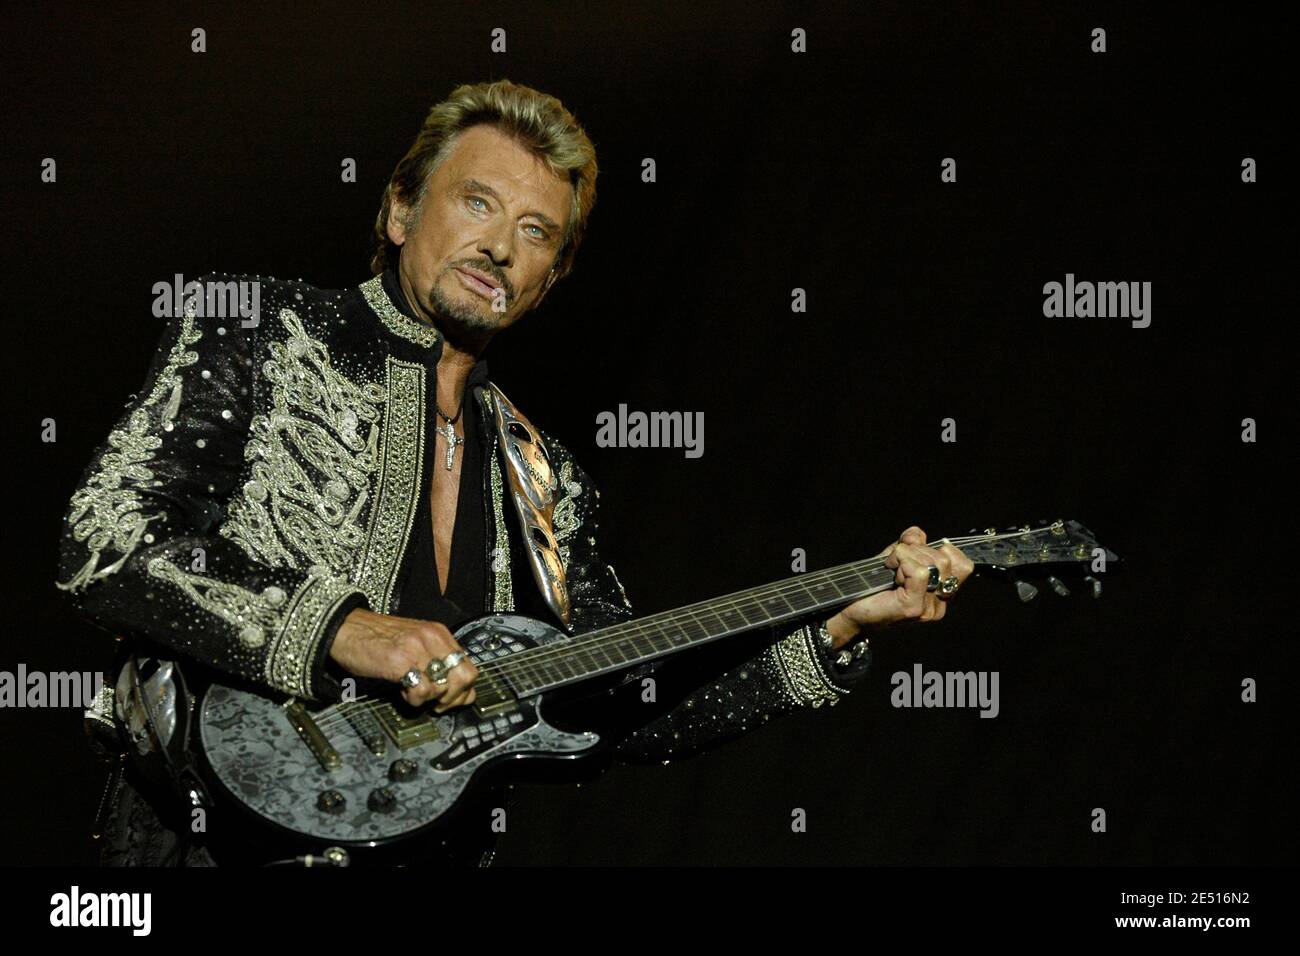 File photo : French singer Johnny Hallyday performs live on stage